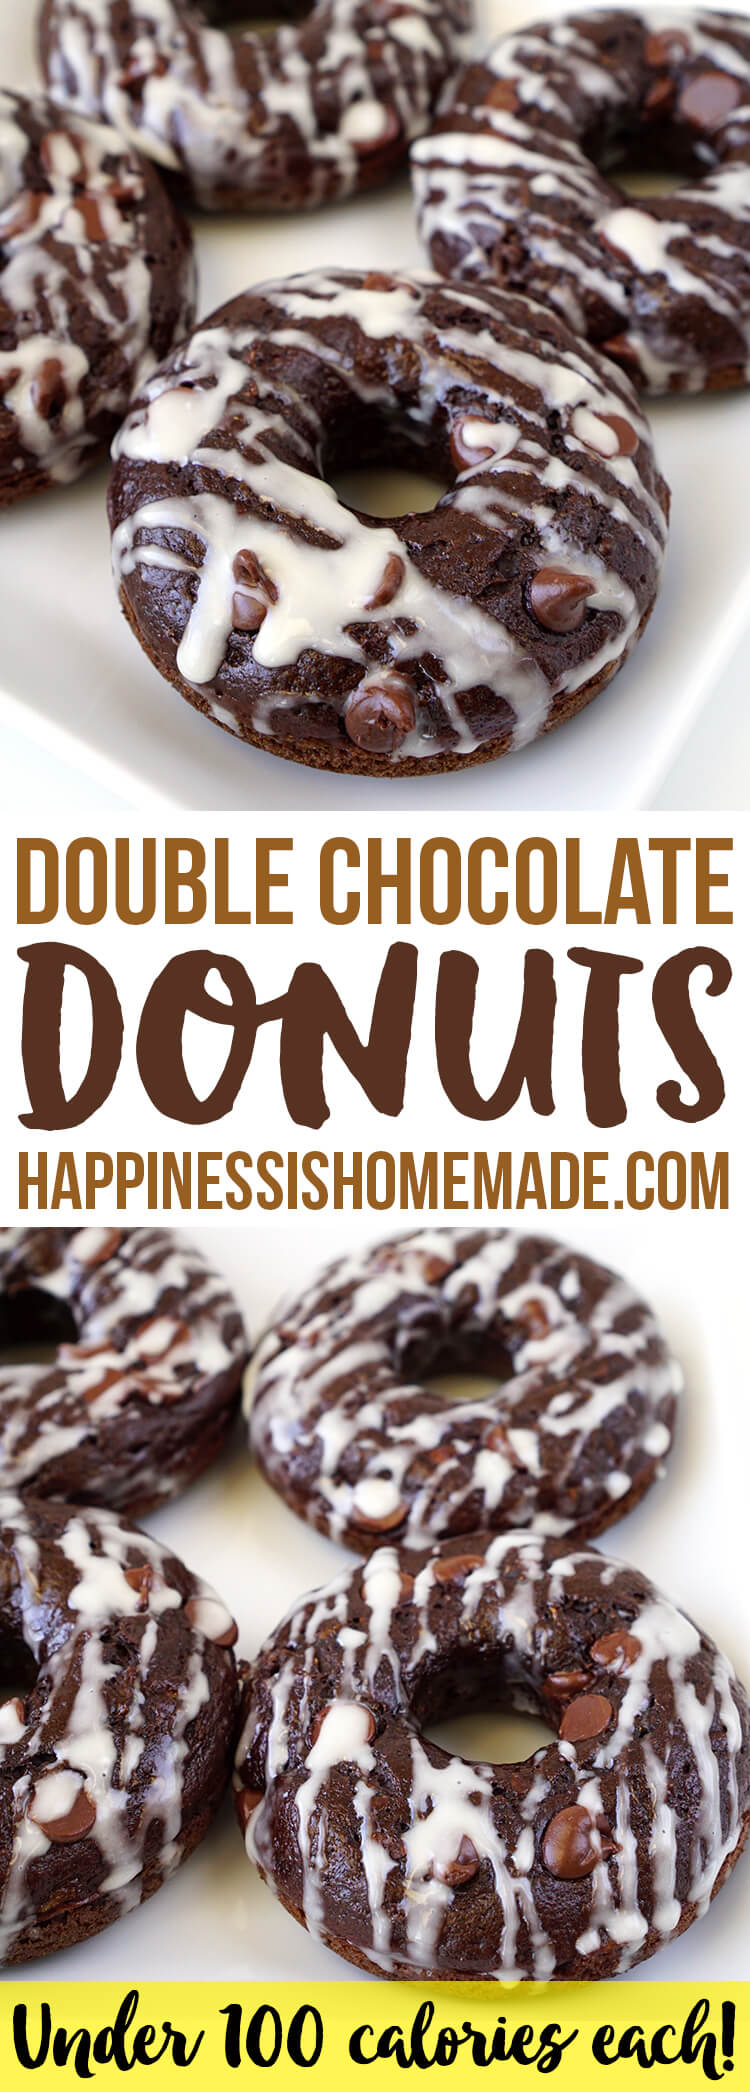 double chocolate donuts from happinessishomemade.com